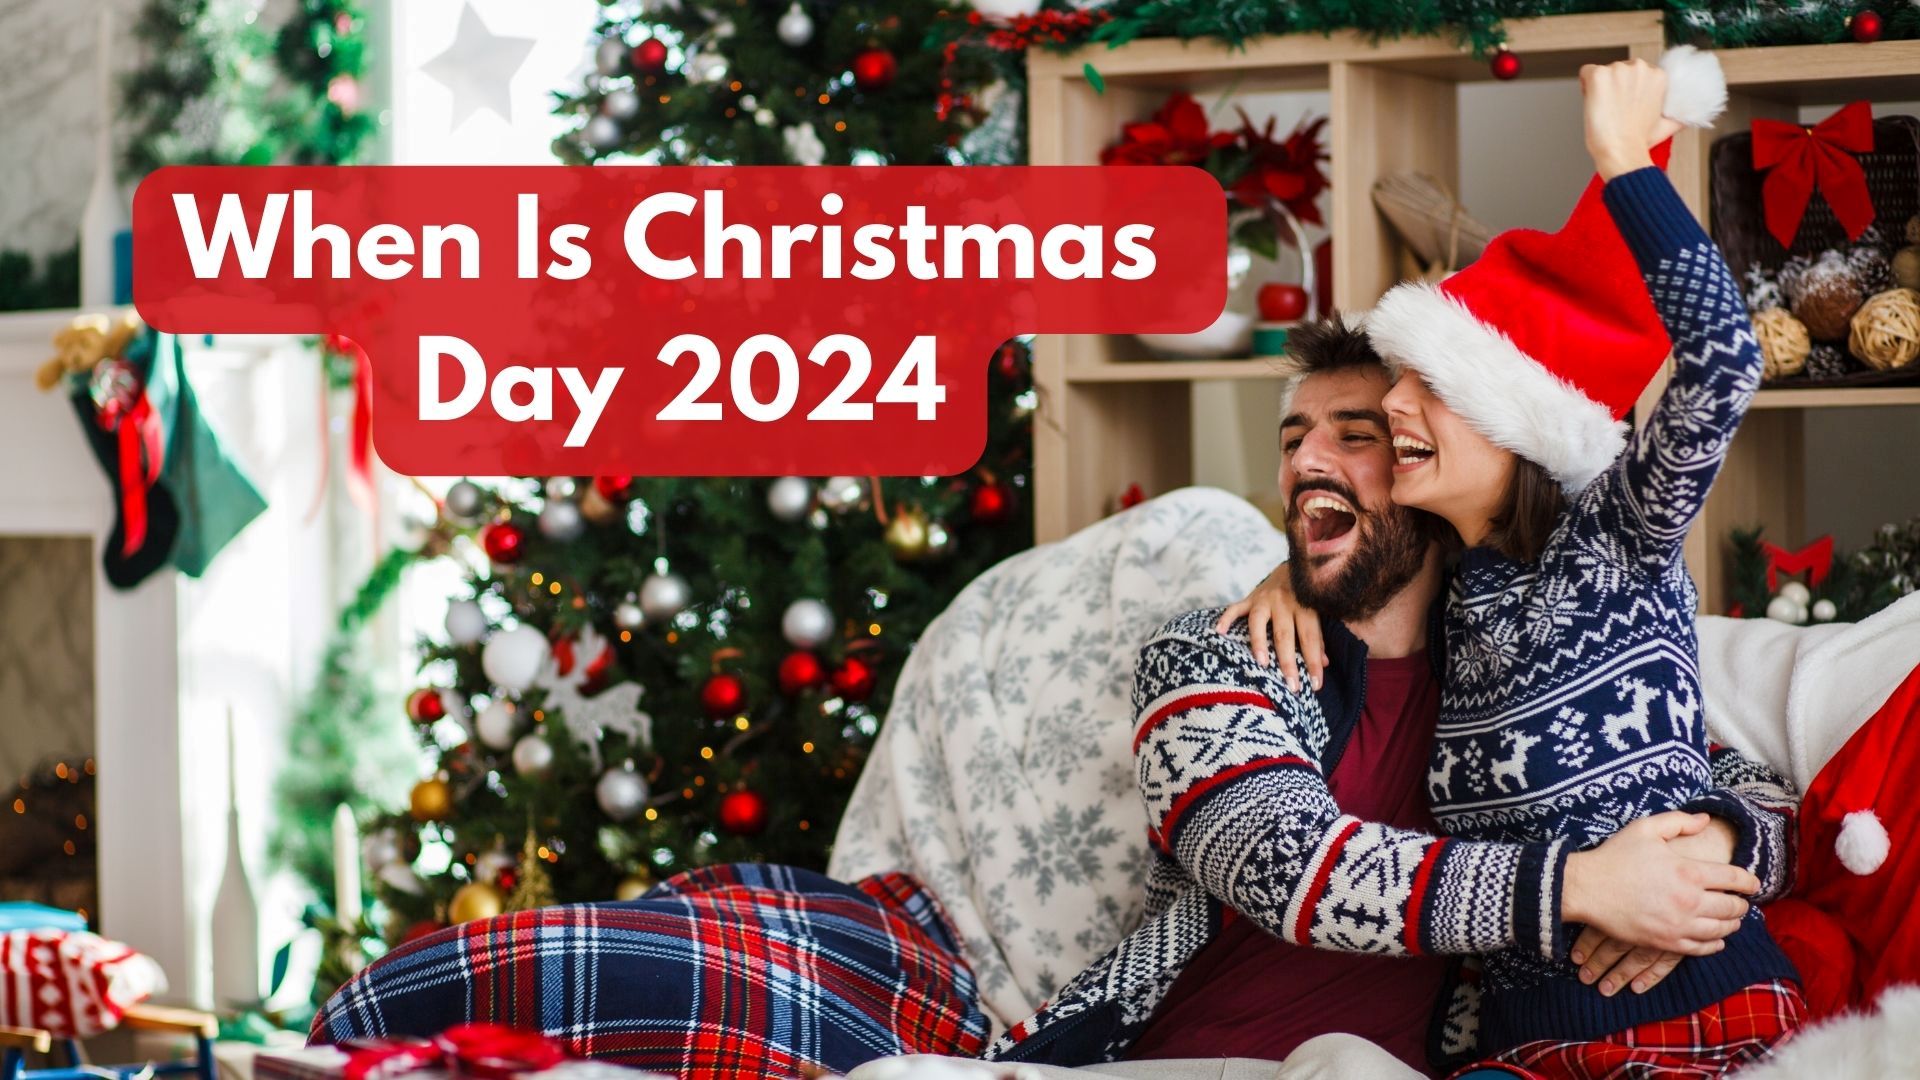 When Is Christmas Day 2024? Countdown The Date